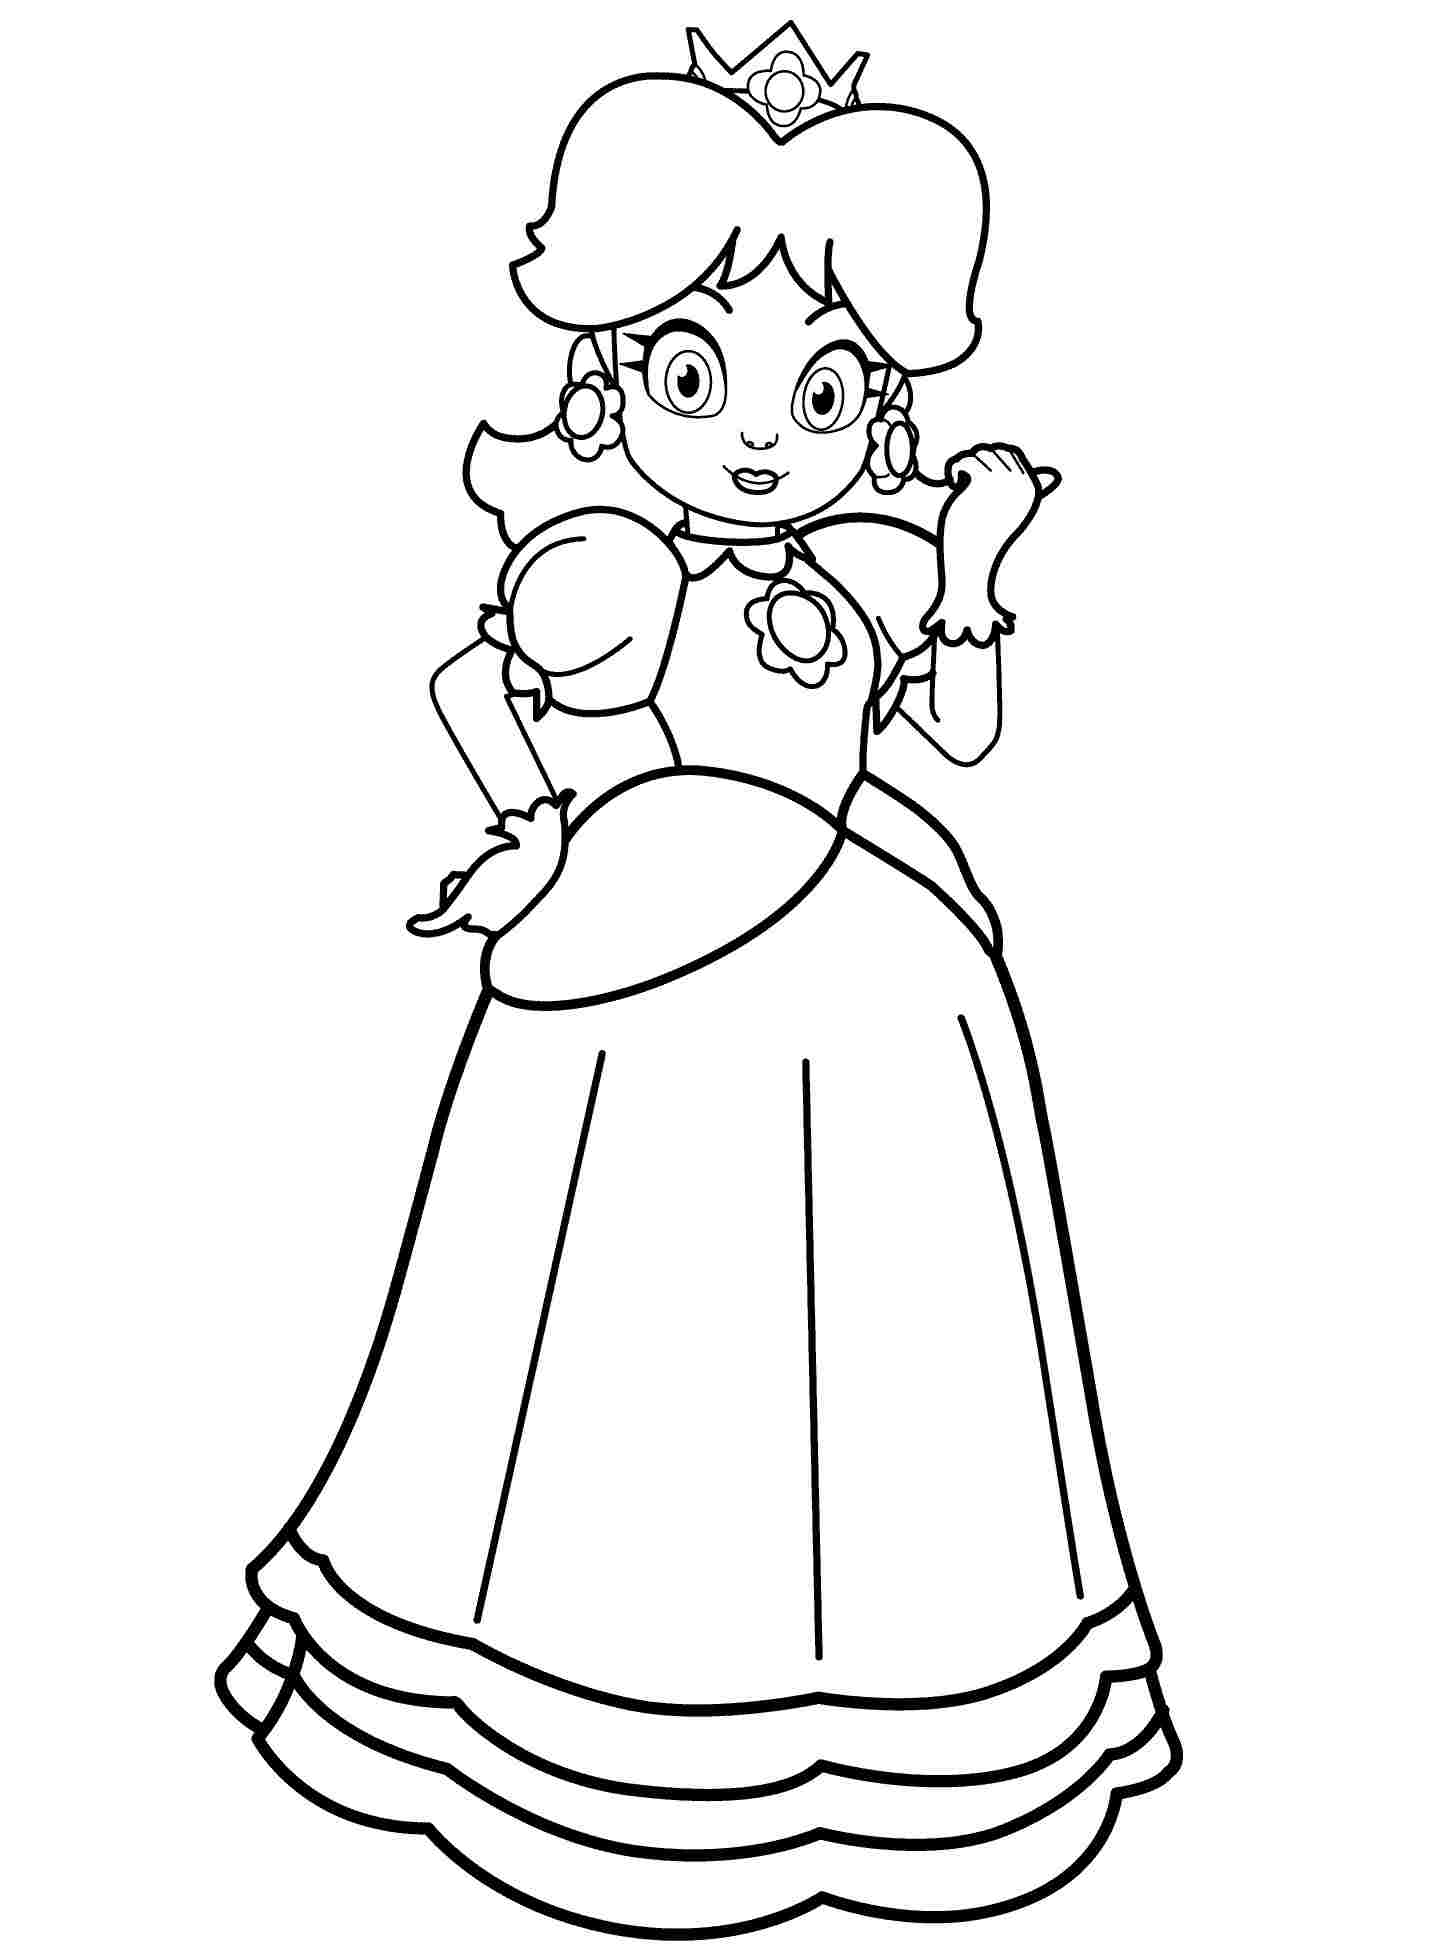 Princess Daisy is pointing something Coloring Pages